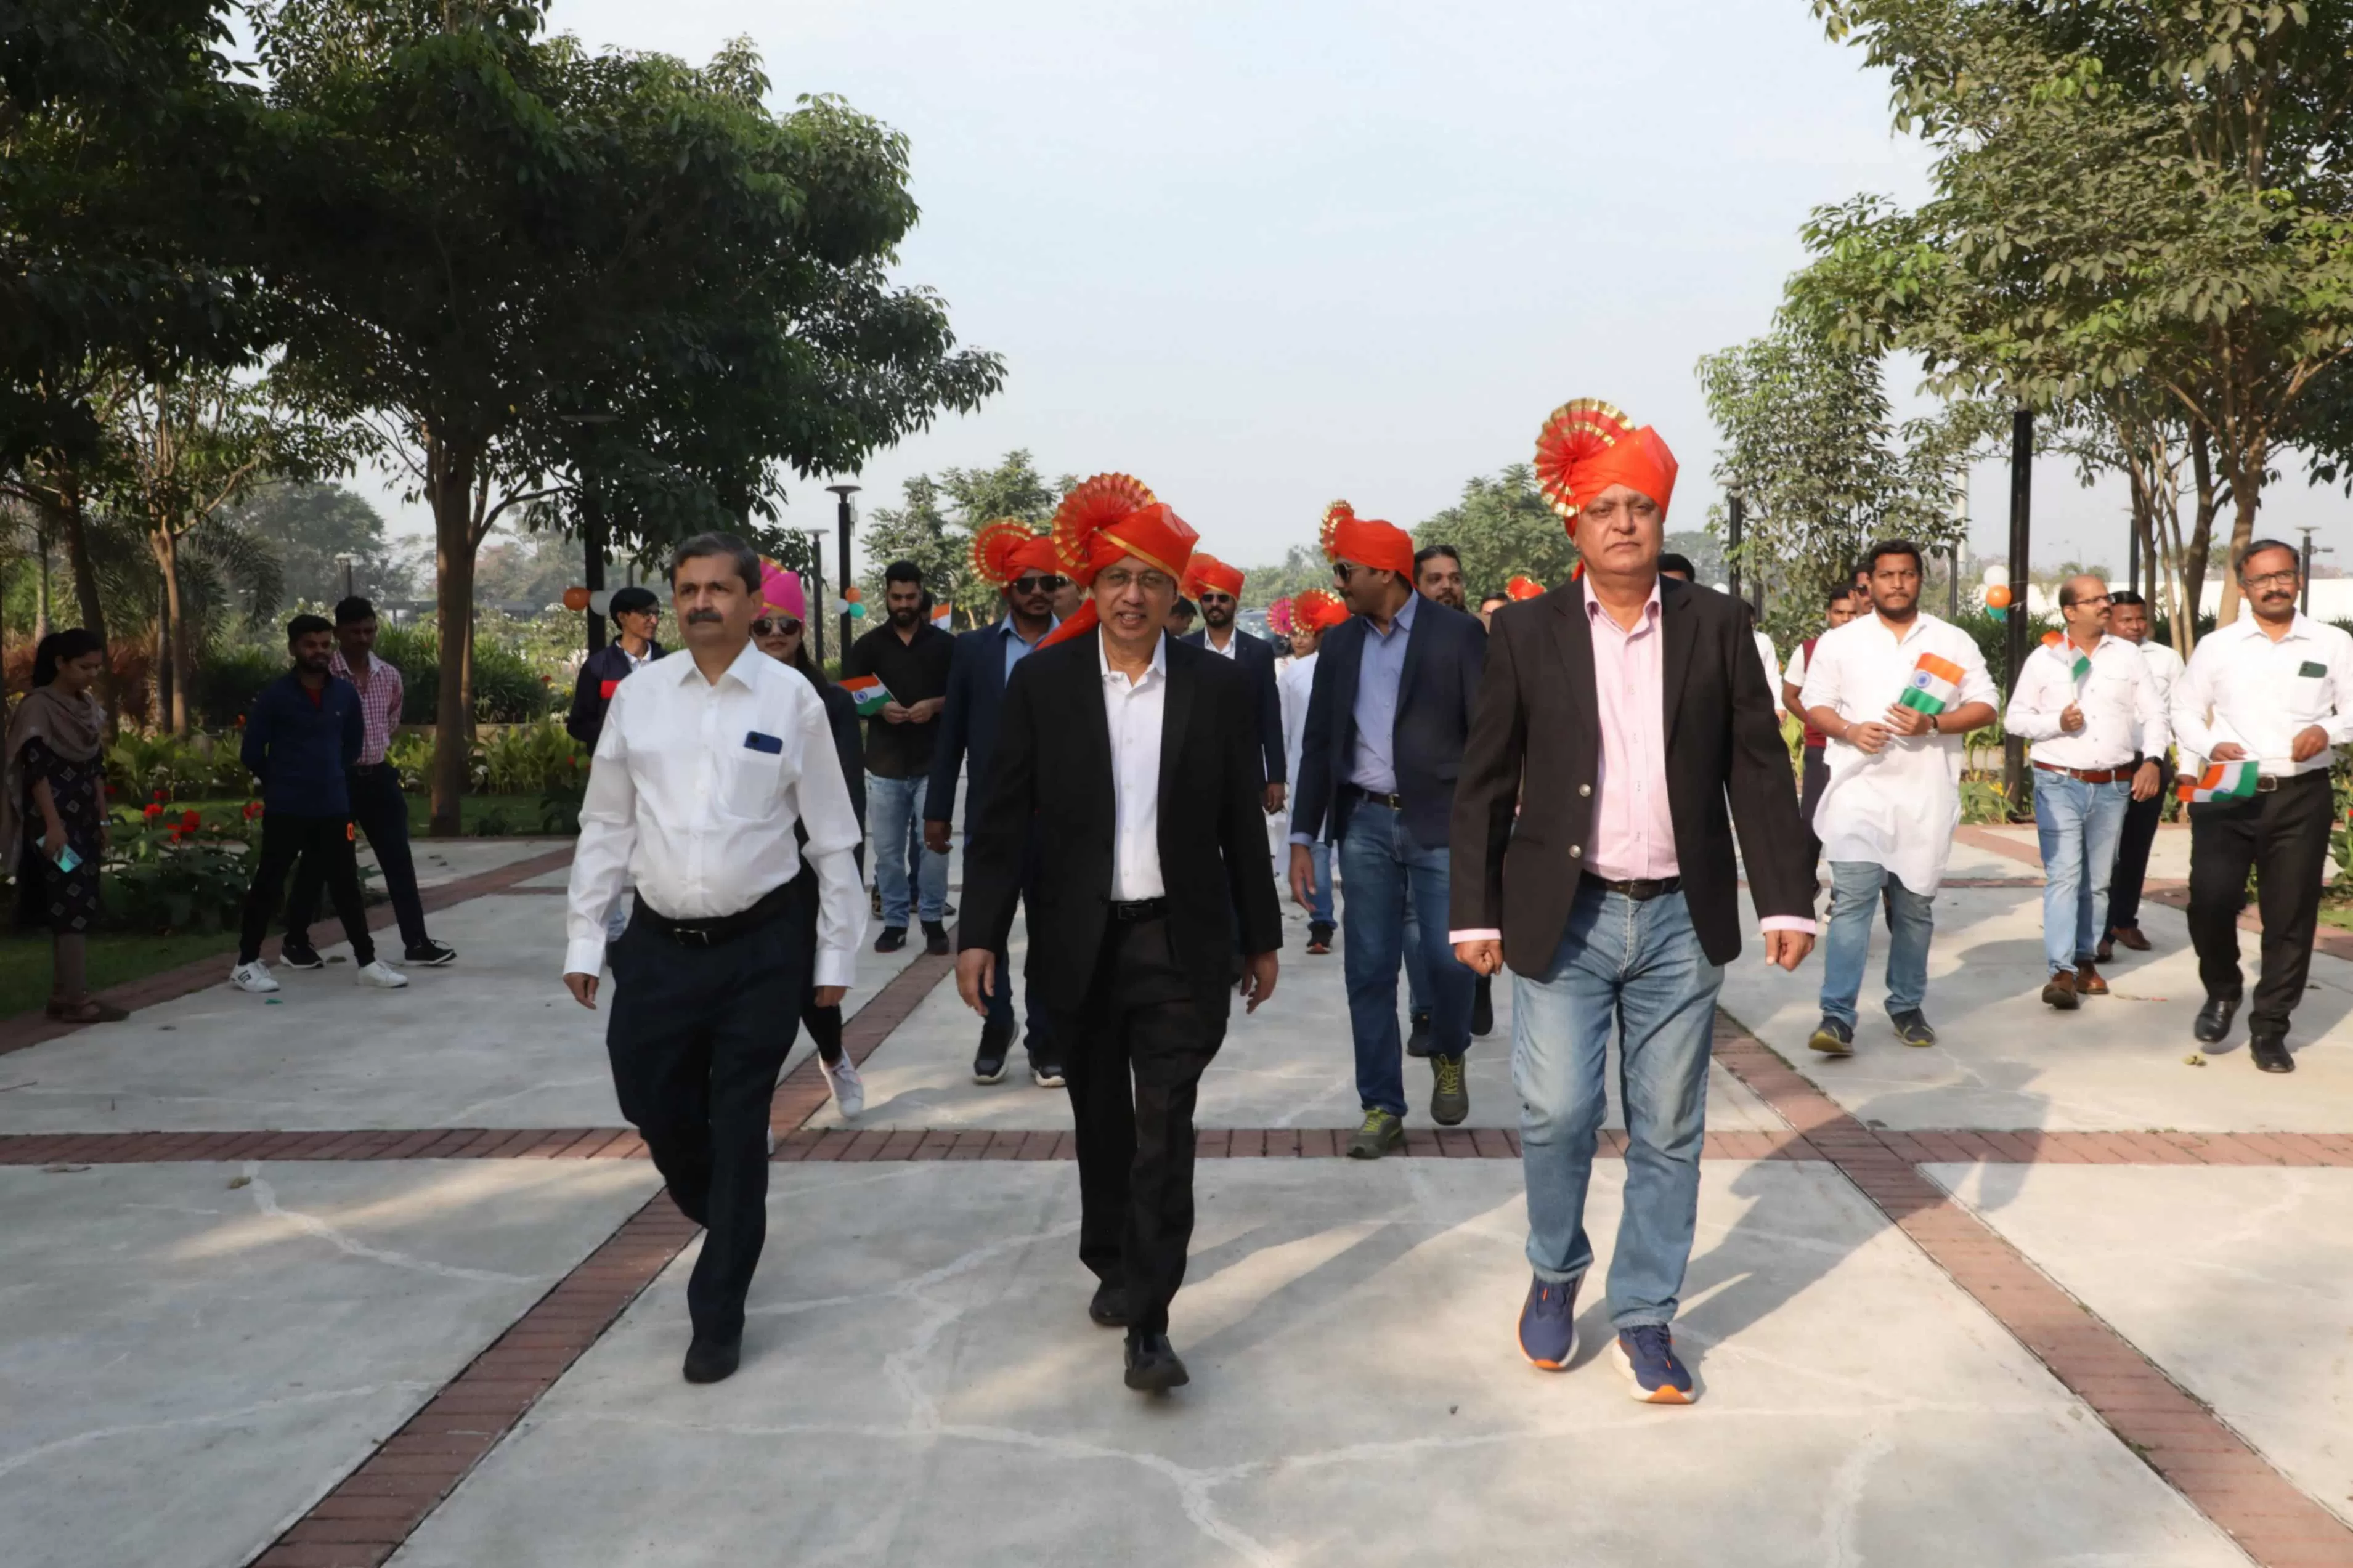 Dr G Ravichandran, Dr Nilay Yagnik and Cpt. Dubey marching